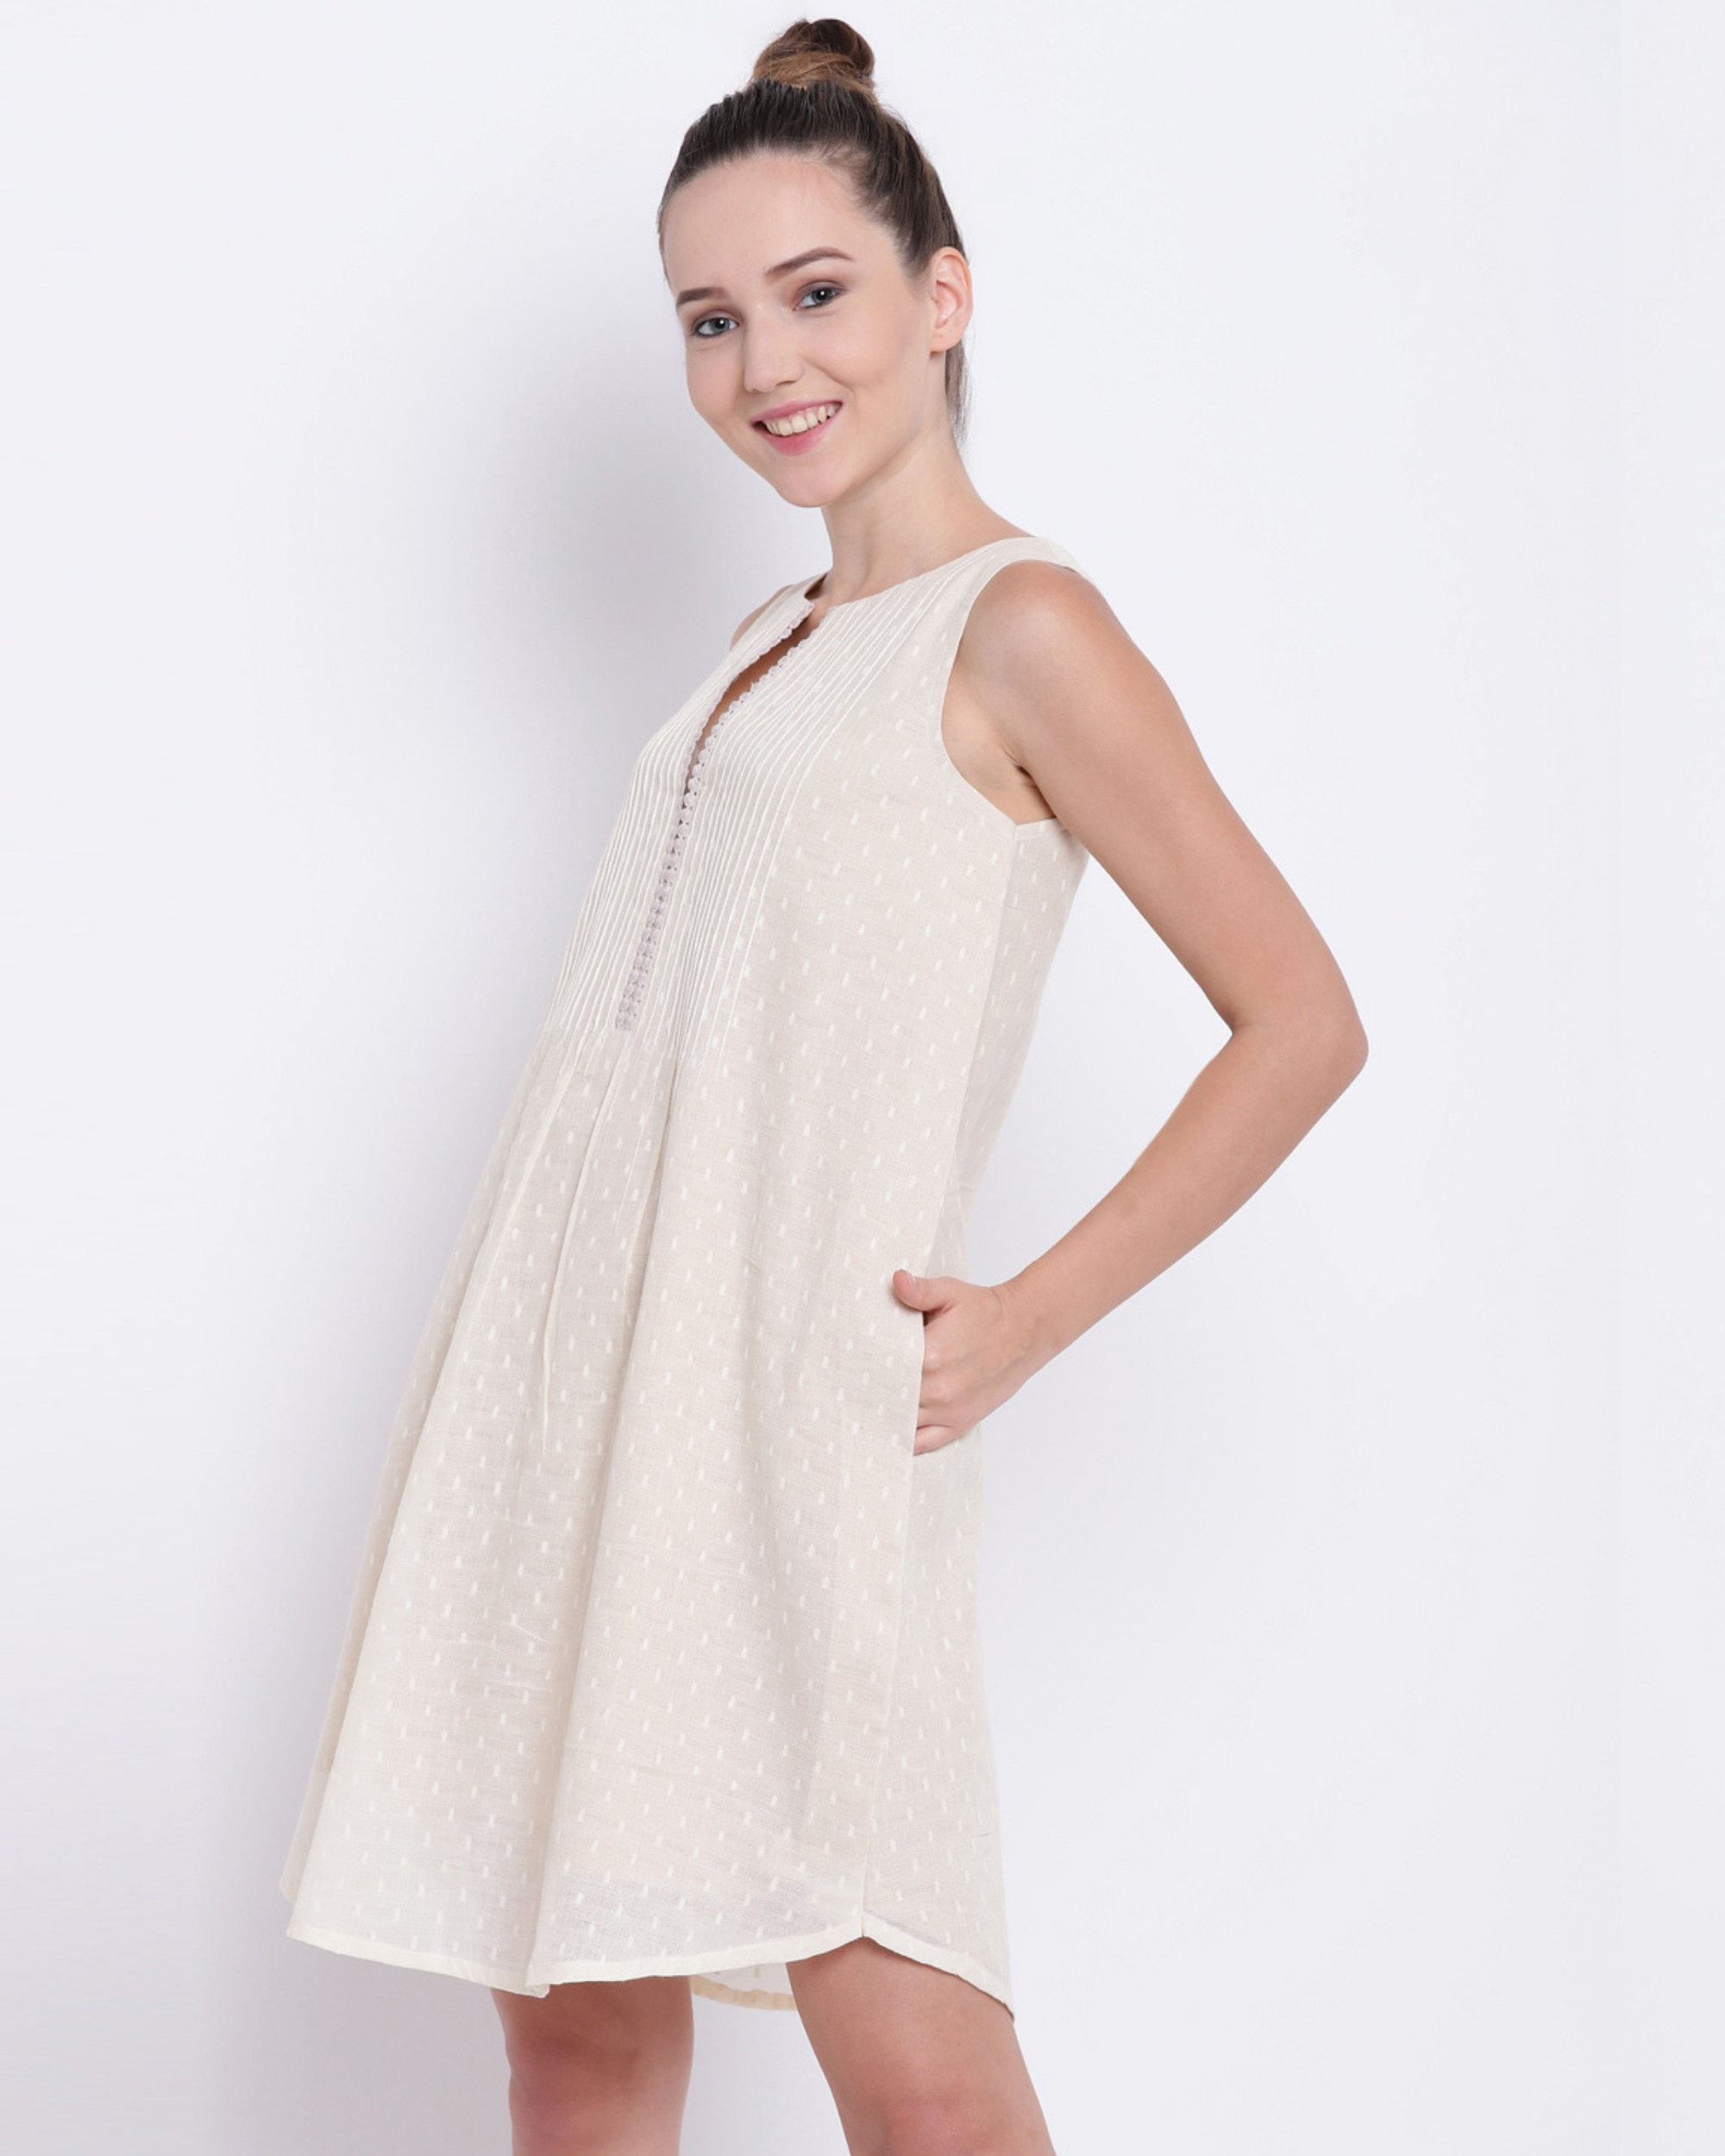 Lace detailed pin tuck dress by trueBrowns | The Secret Label